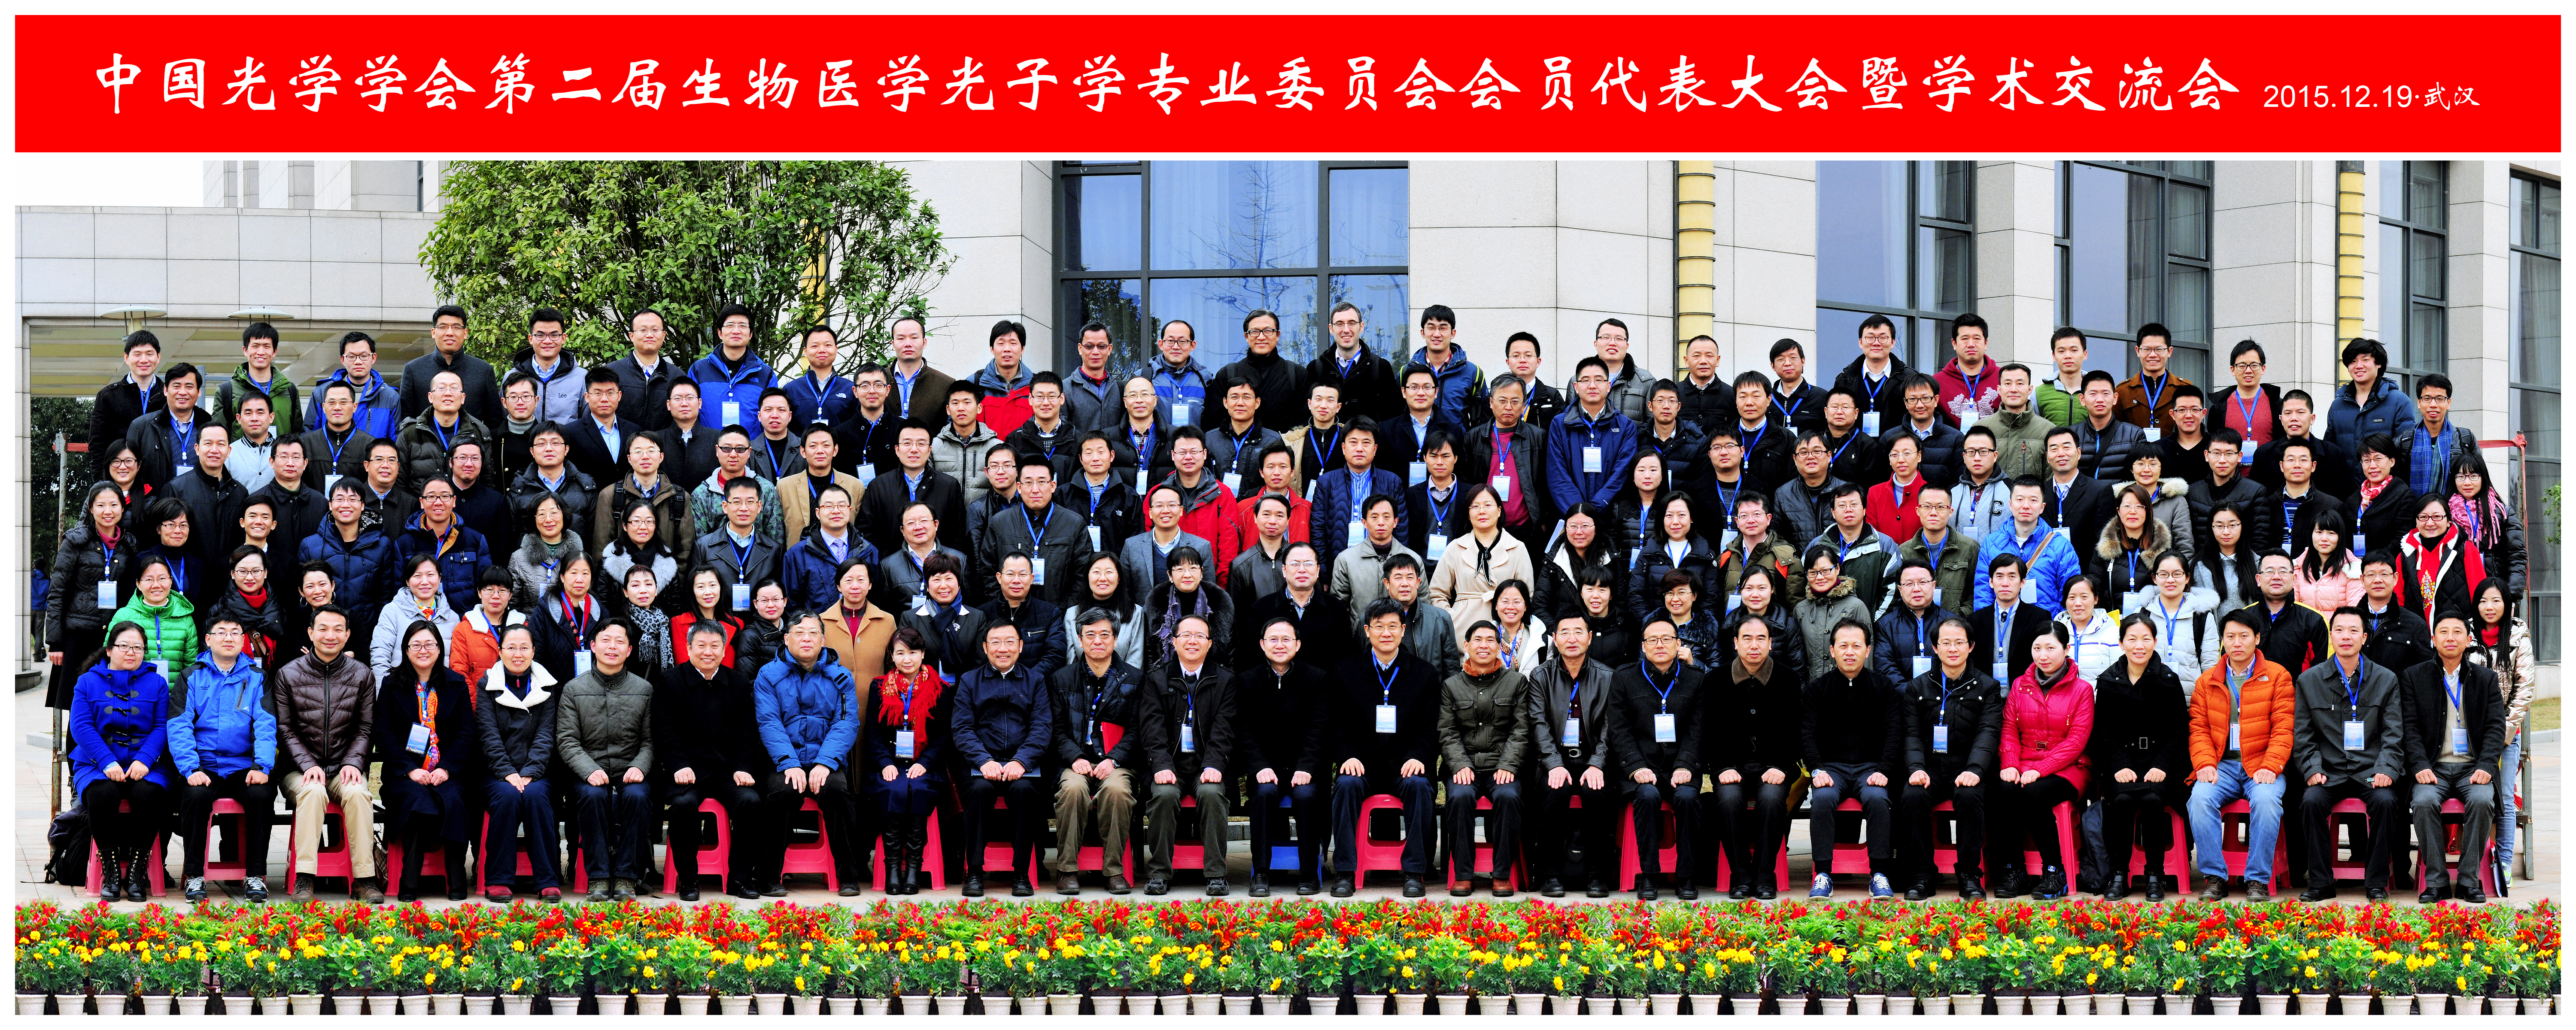 the chinese optical society